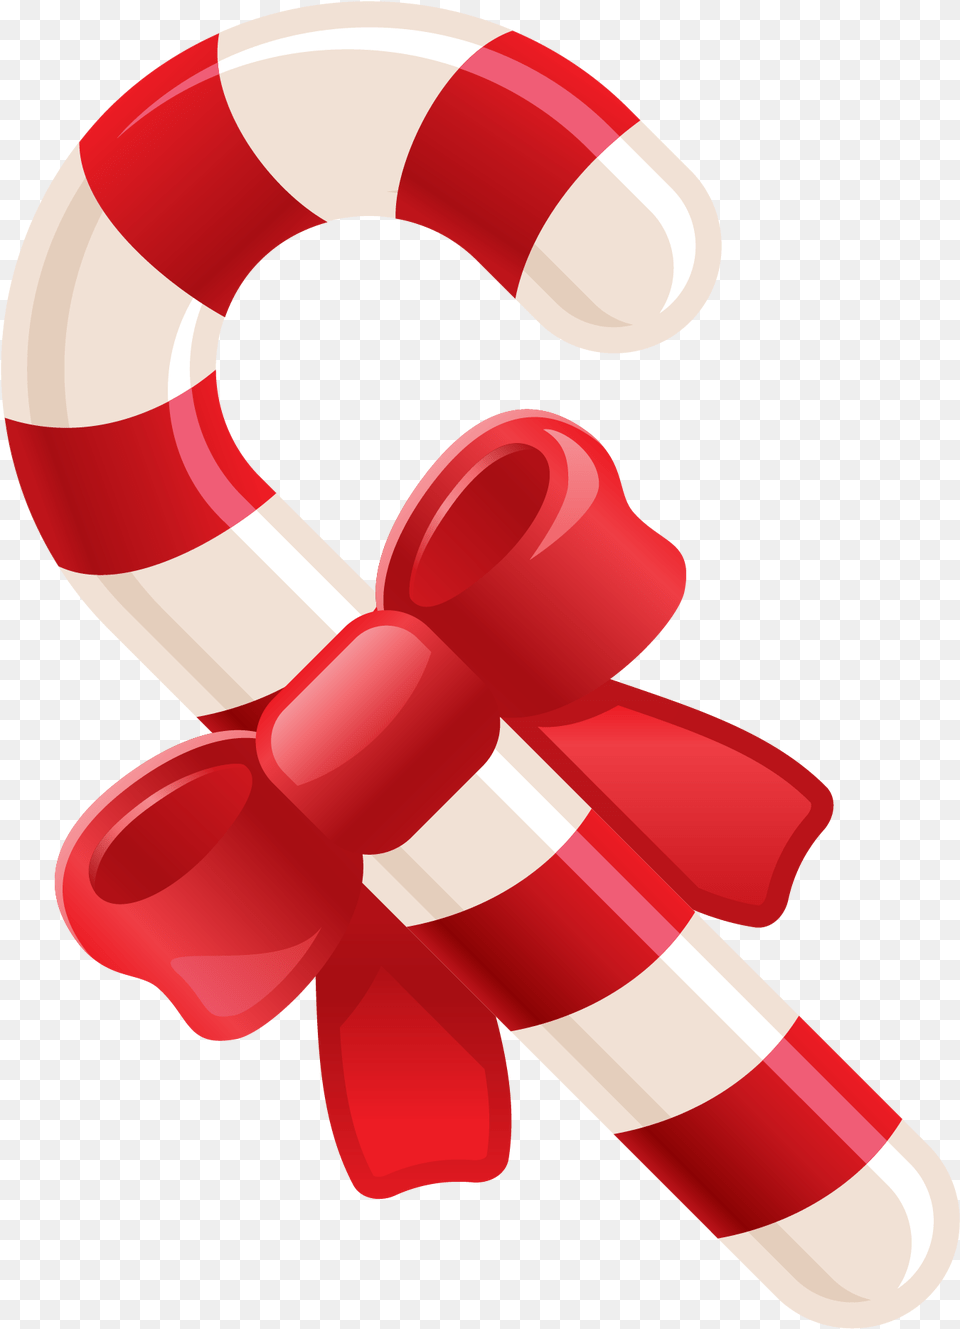 Hq Christmas Candy Images Christmas Candy Cane, Food, Sweets, Stick, Dynamite Png Image